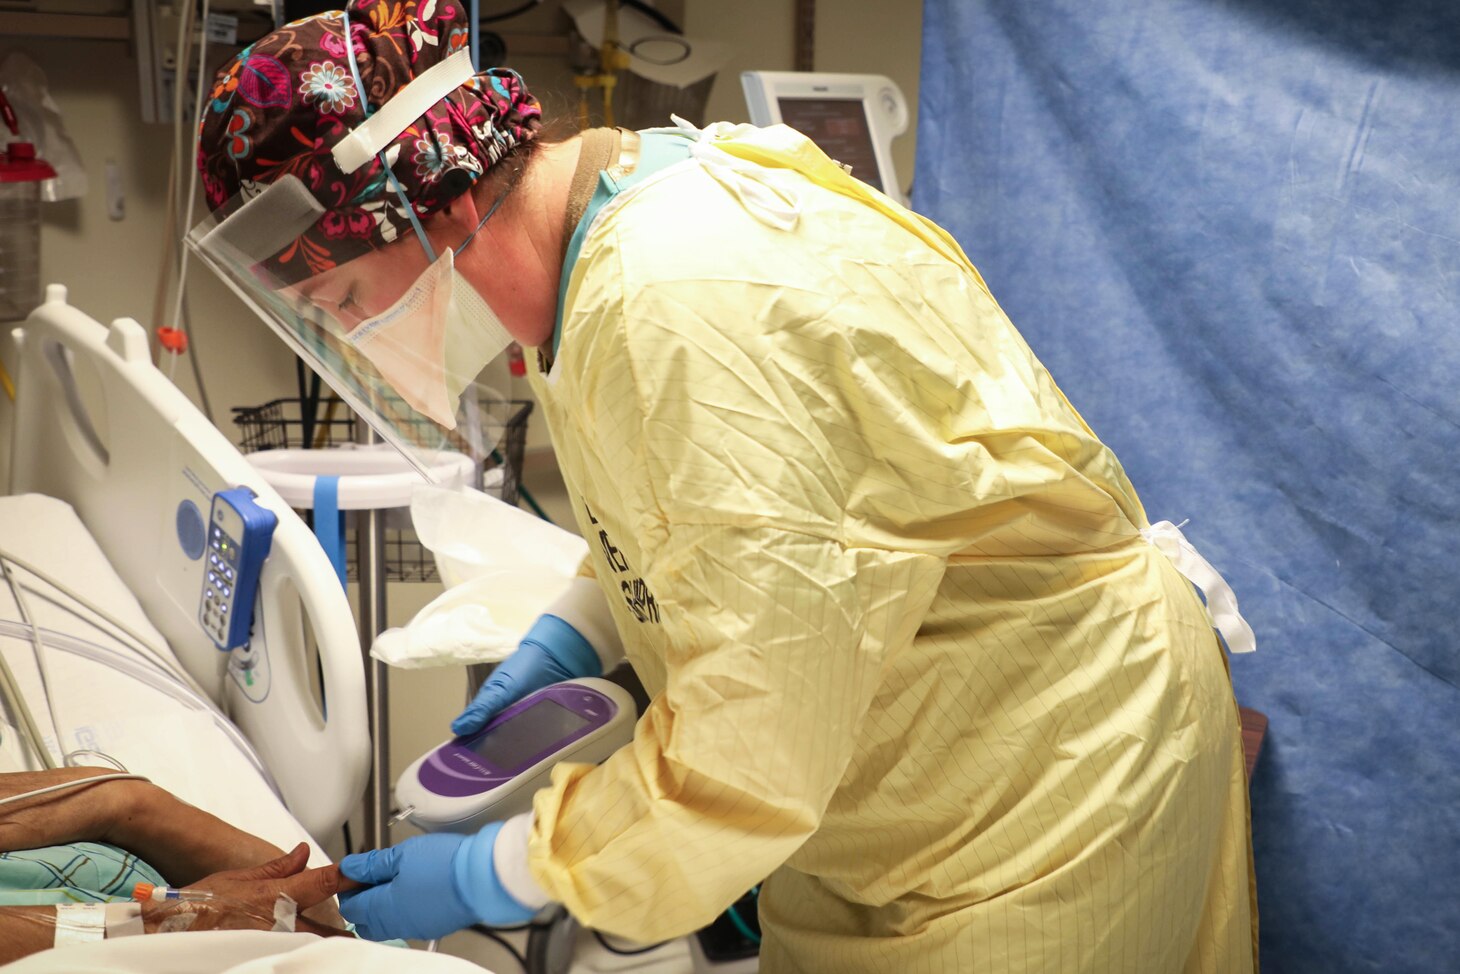 A nurse wearing personal protective equipment checks a patient.